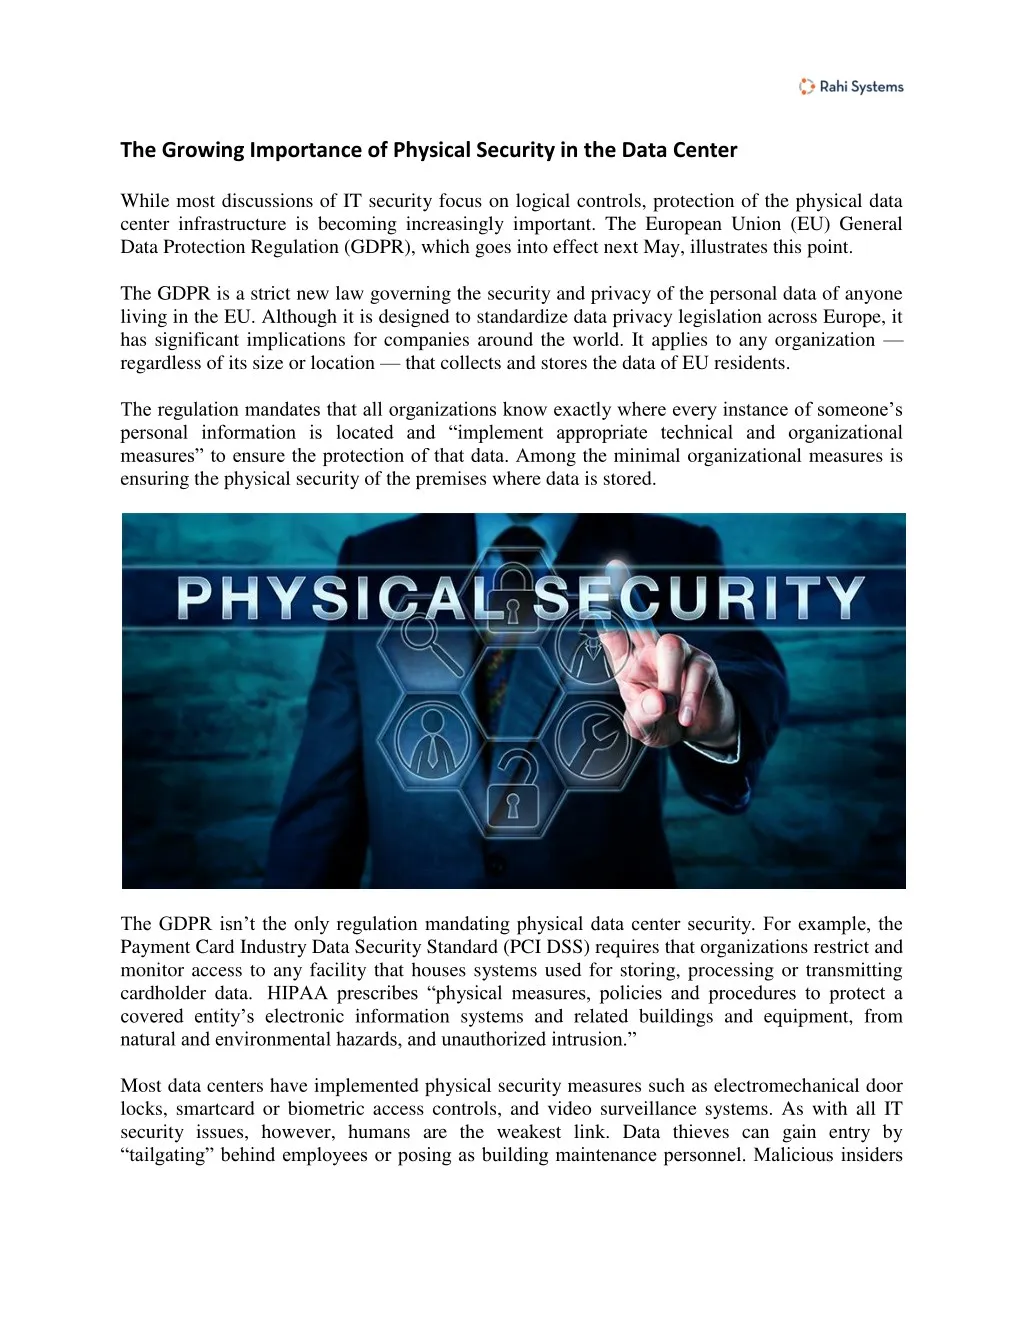 the growing importance of physical security